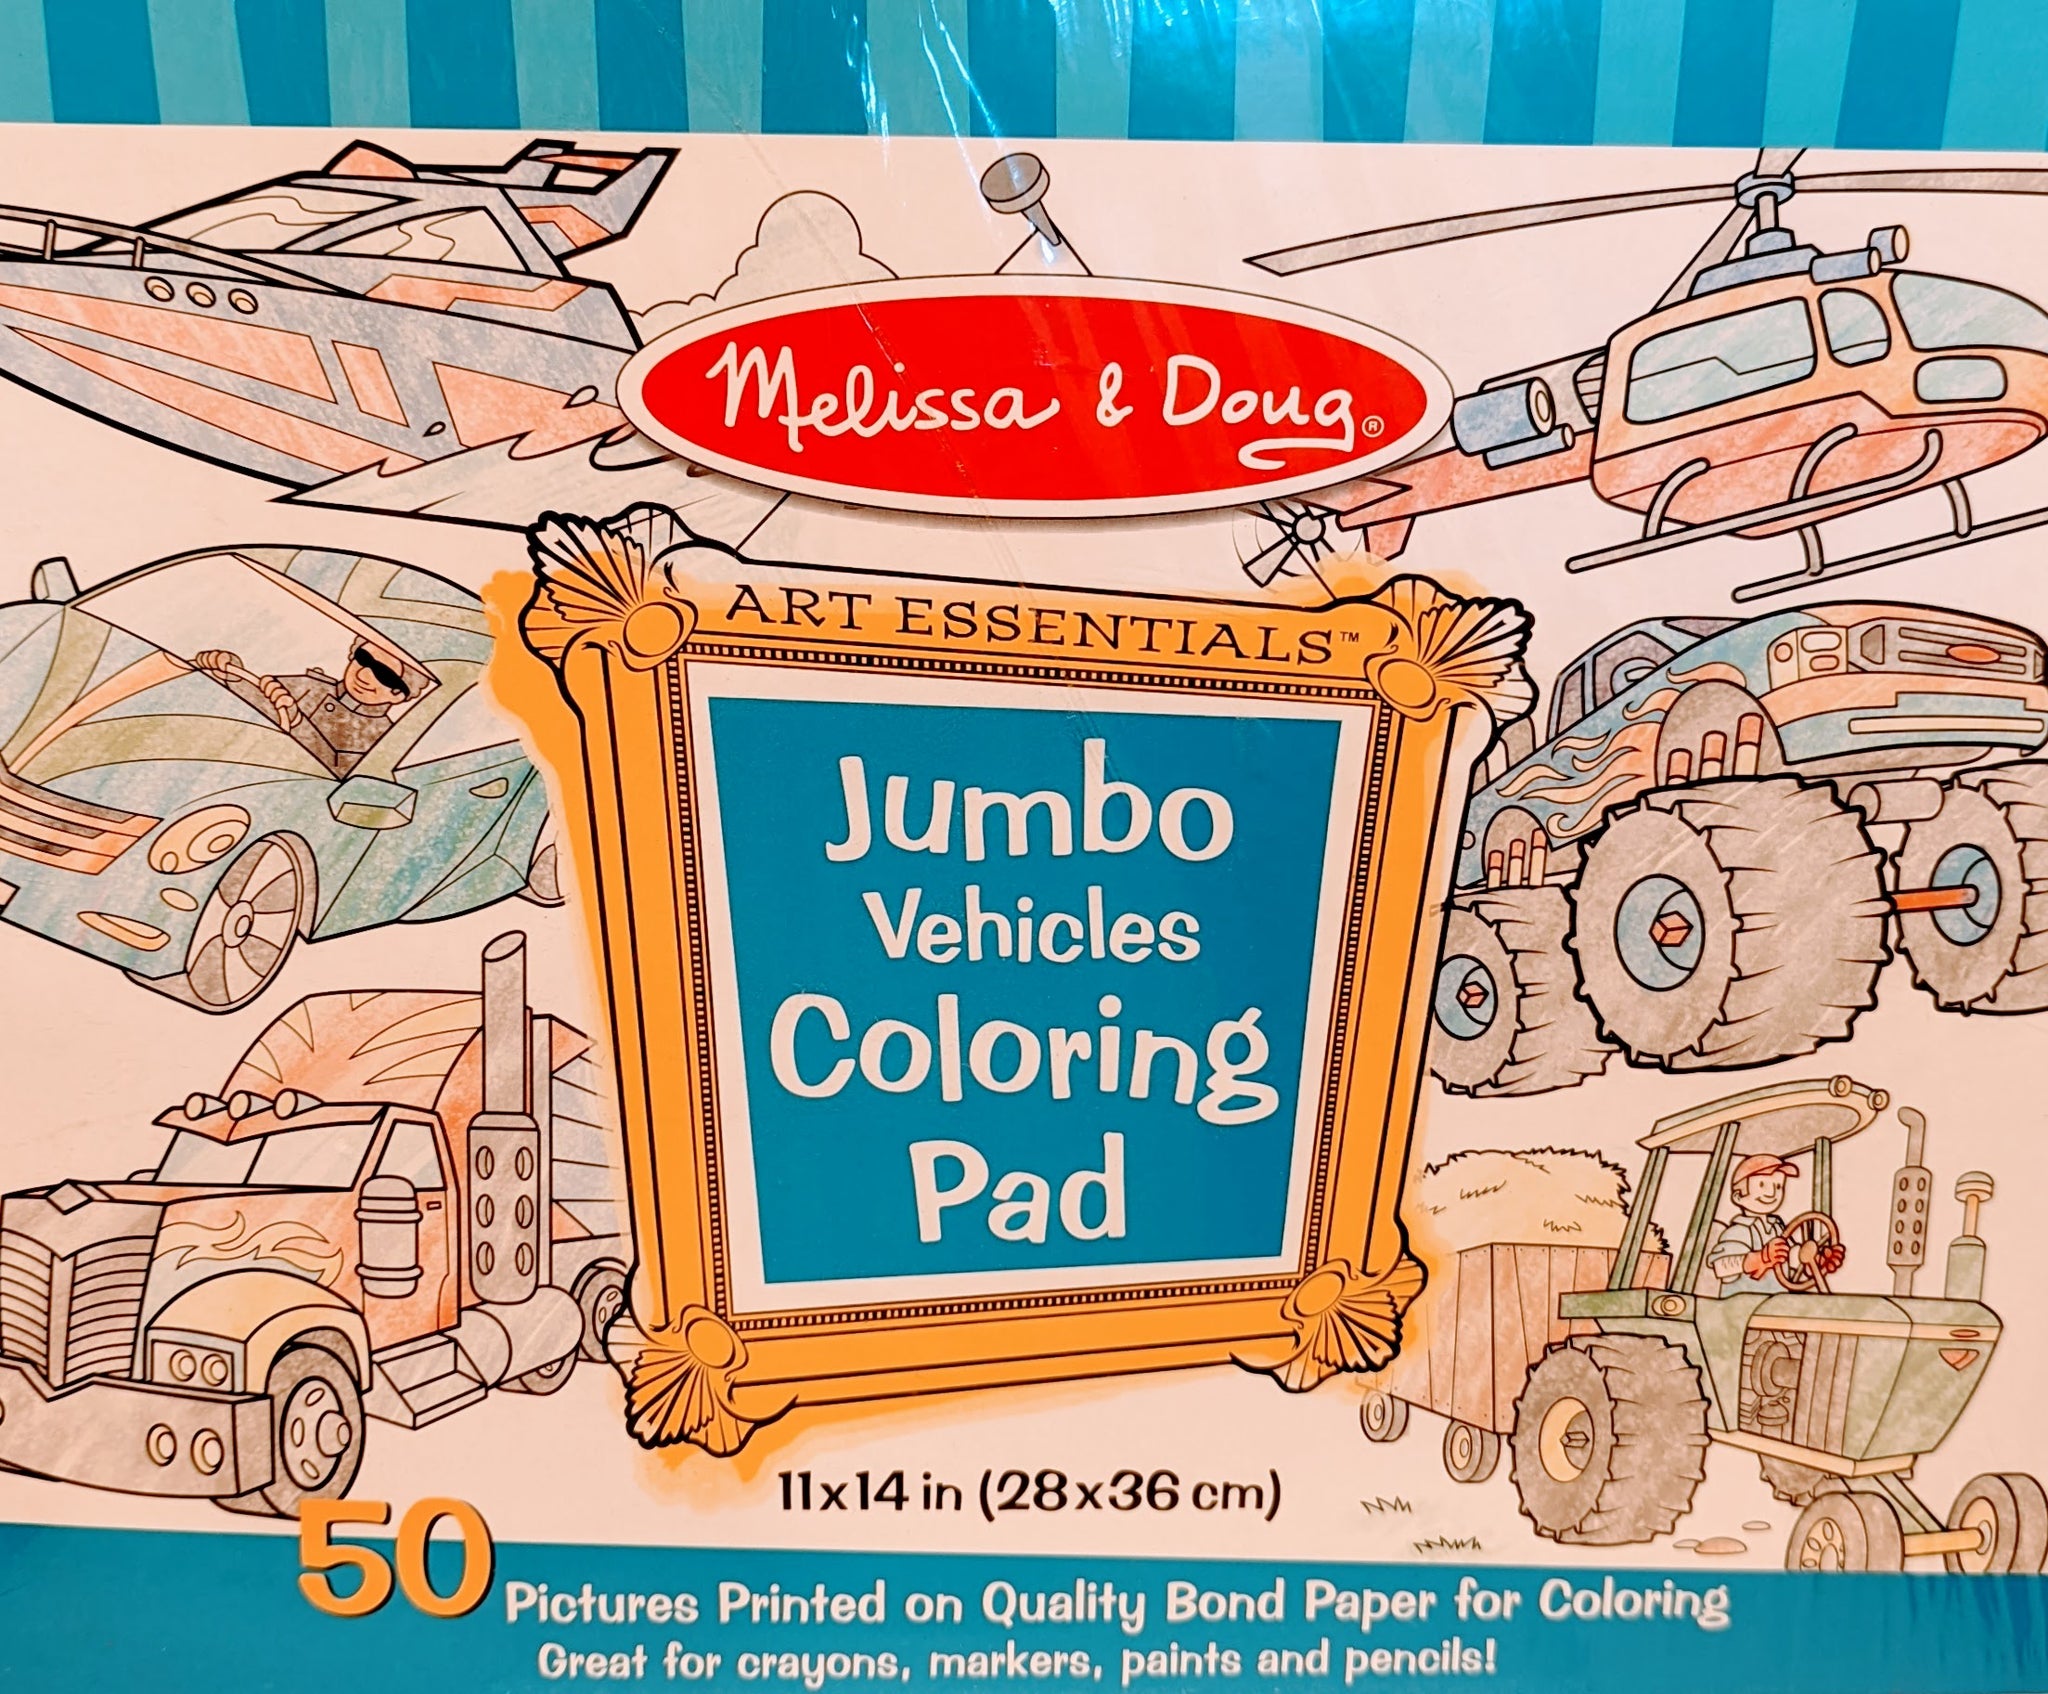 Melissa & Doug Jumbo Coloring Pad (11 x 14 inches) - Town, 50 Pictures